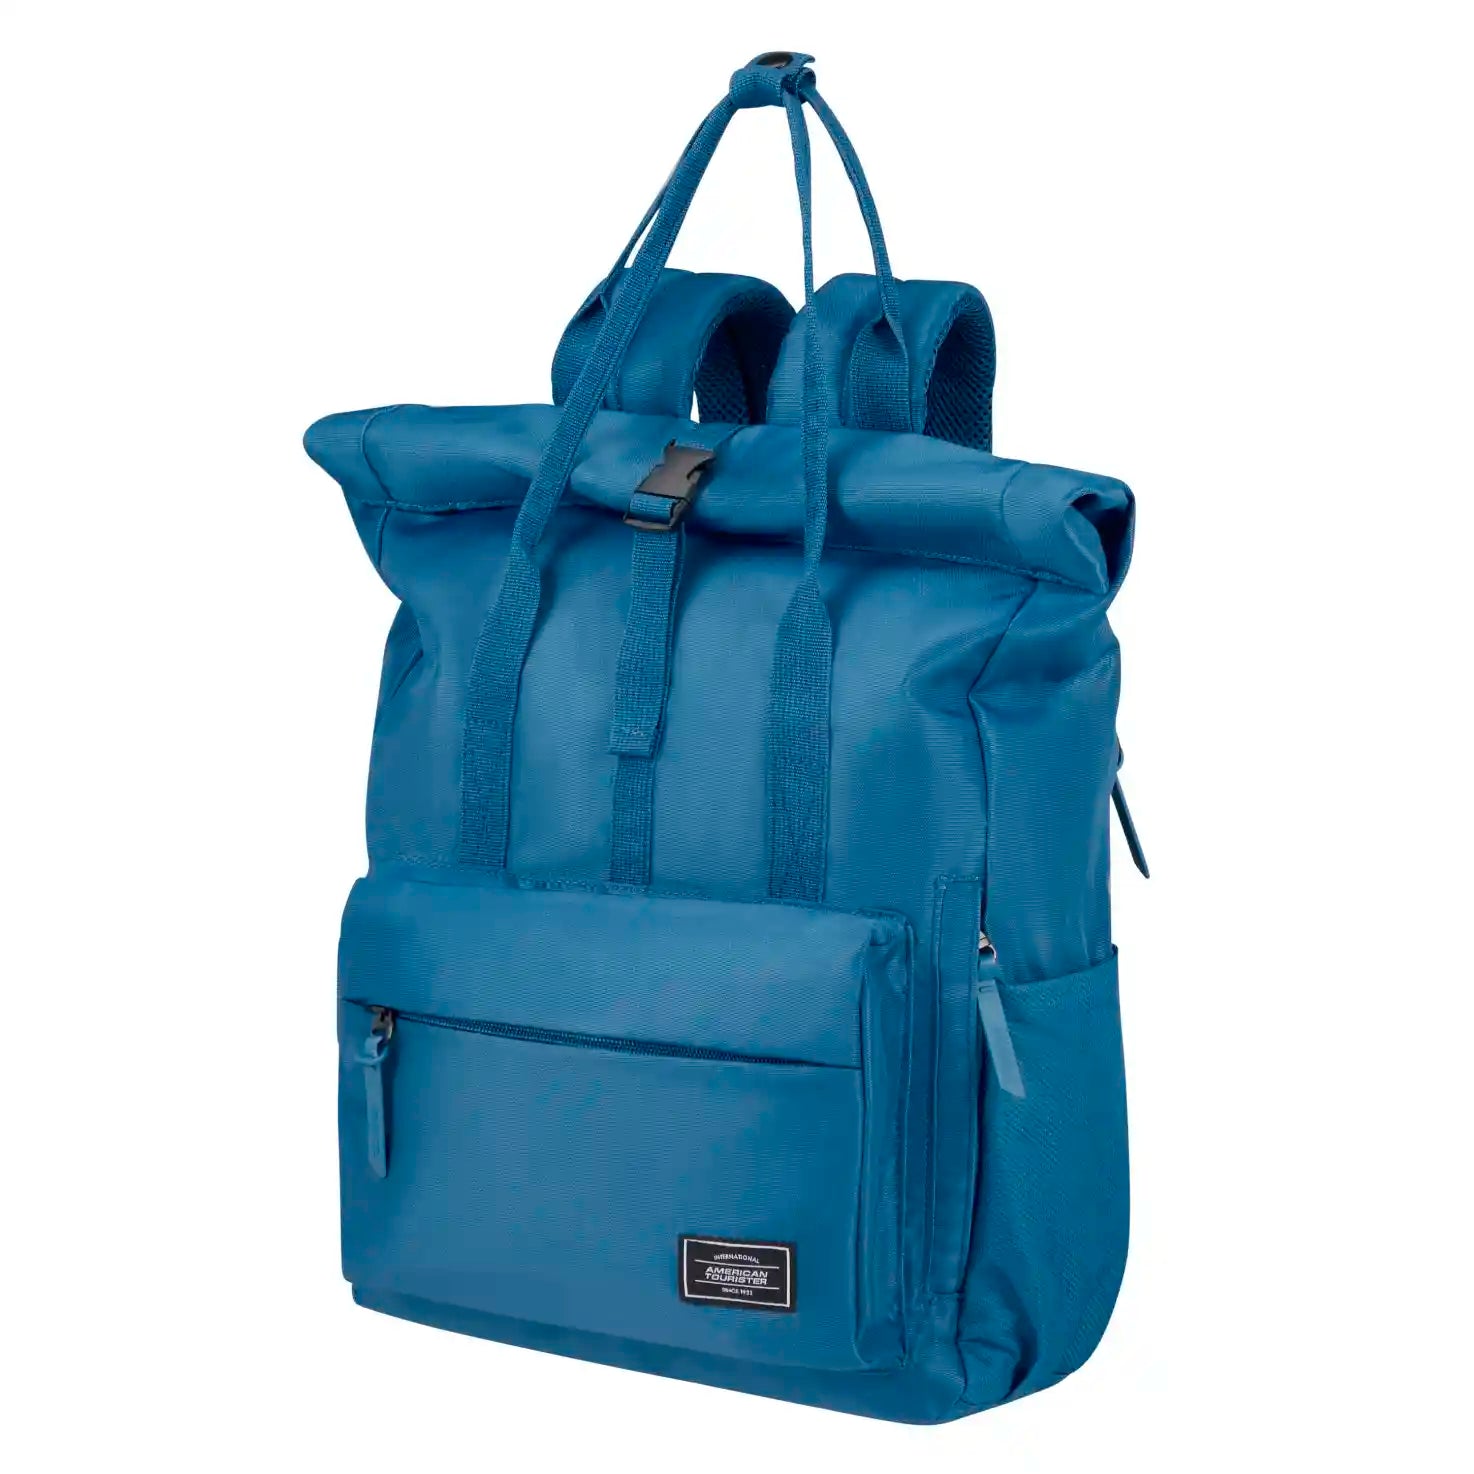 American Tourister Urban Groove Tote Backpack 43 cm - Stone Blue